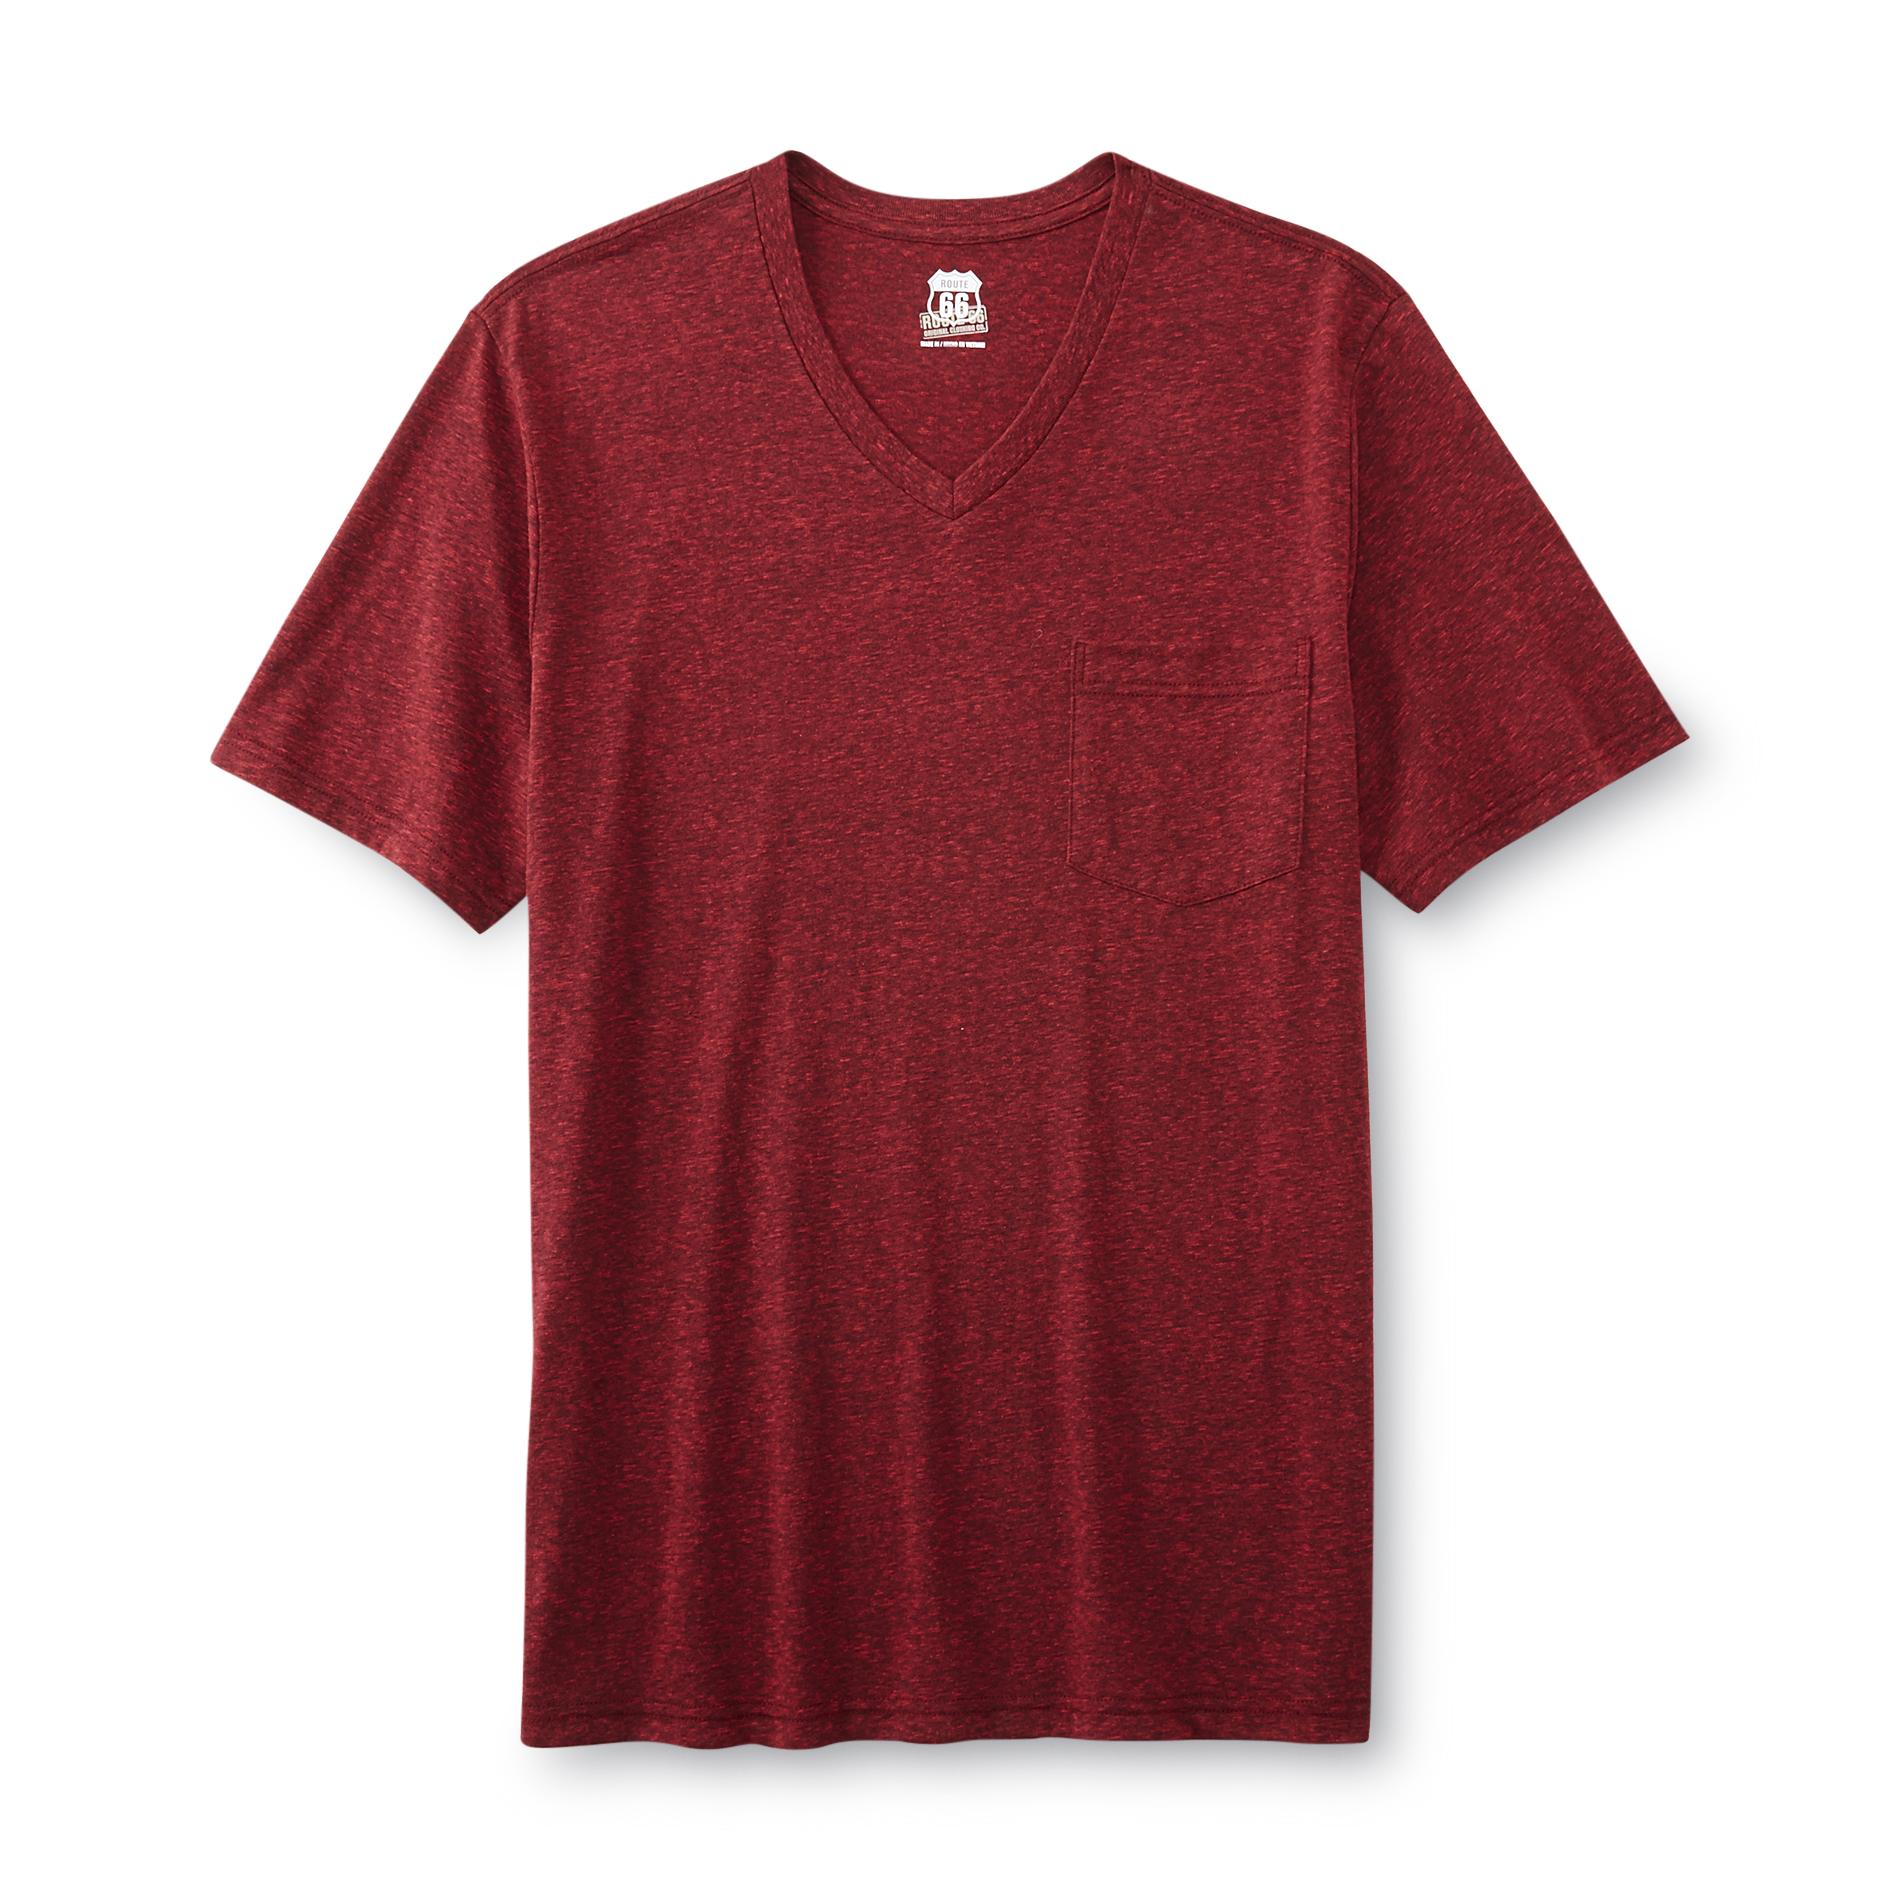 Route 66 Men's V-Neck T-Shirt - Space Dyed